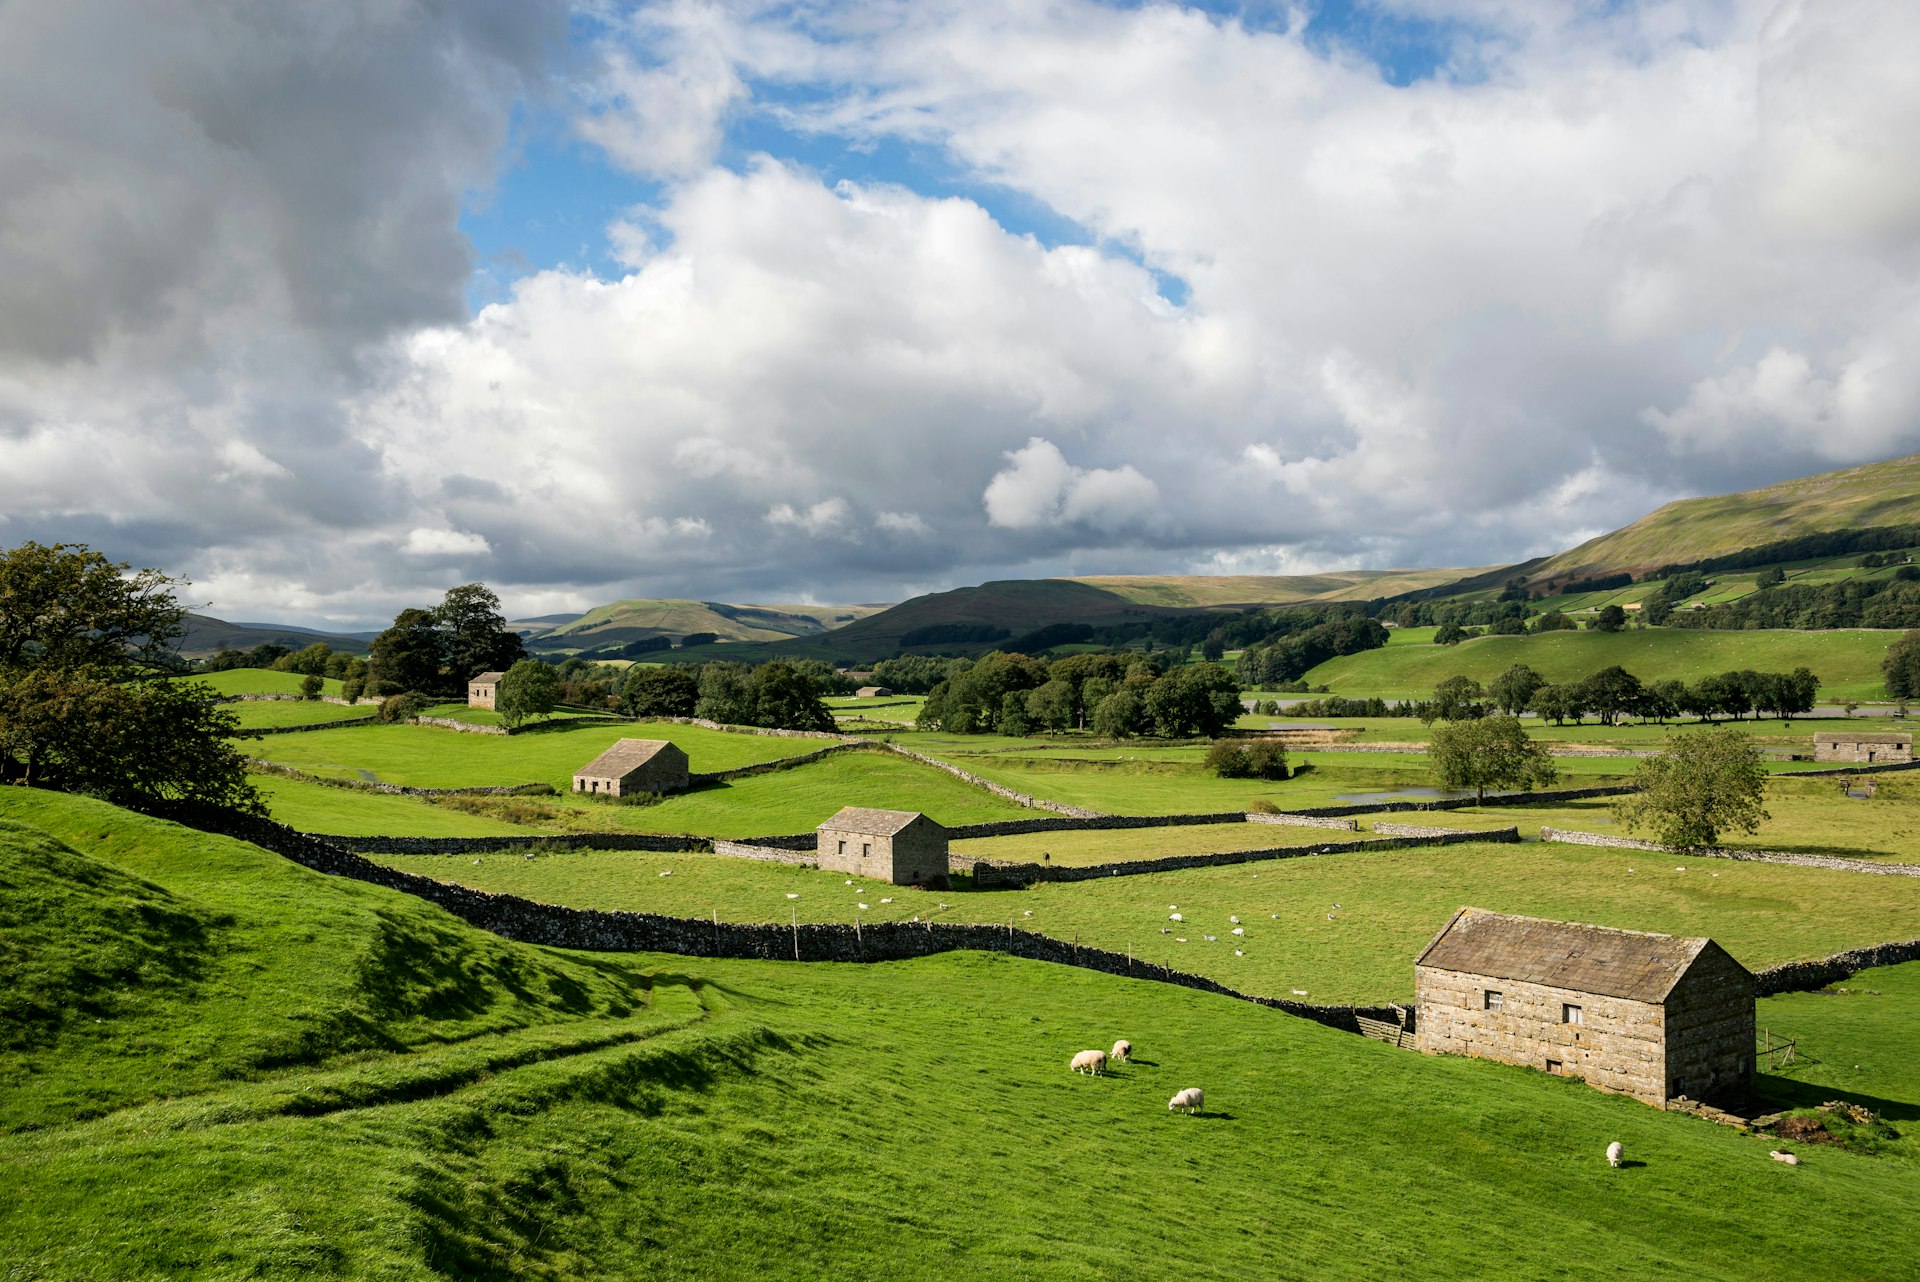 Lush, rolling fields and small stone buildings in Wensleydale